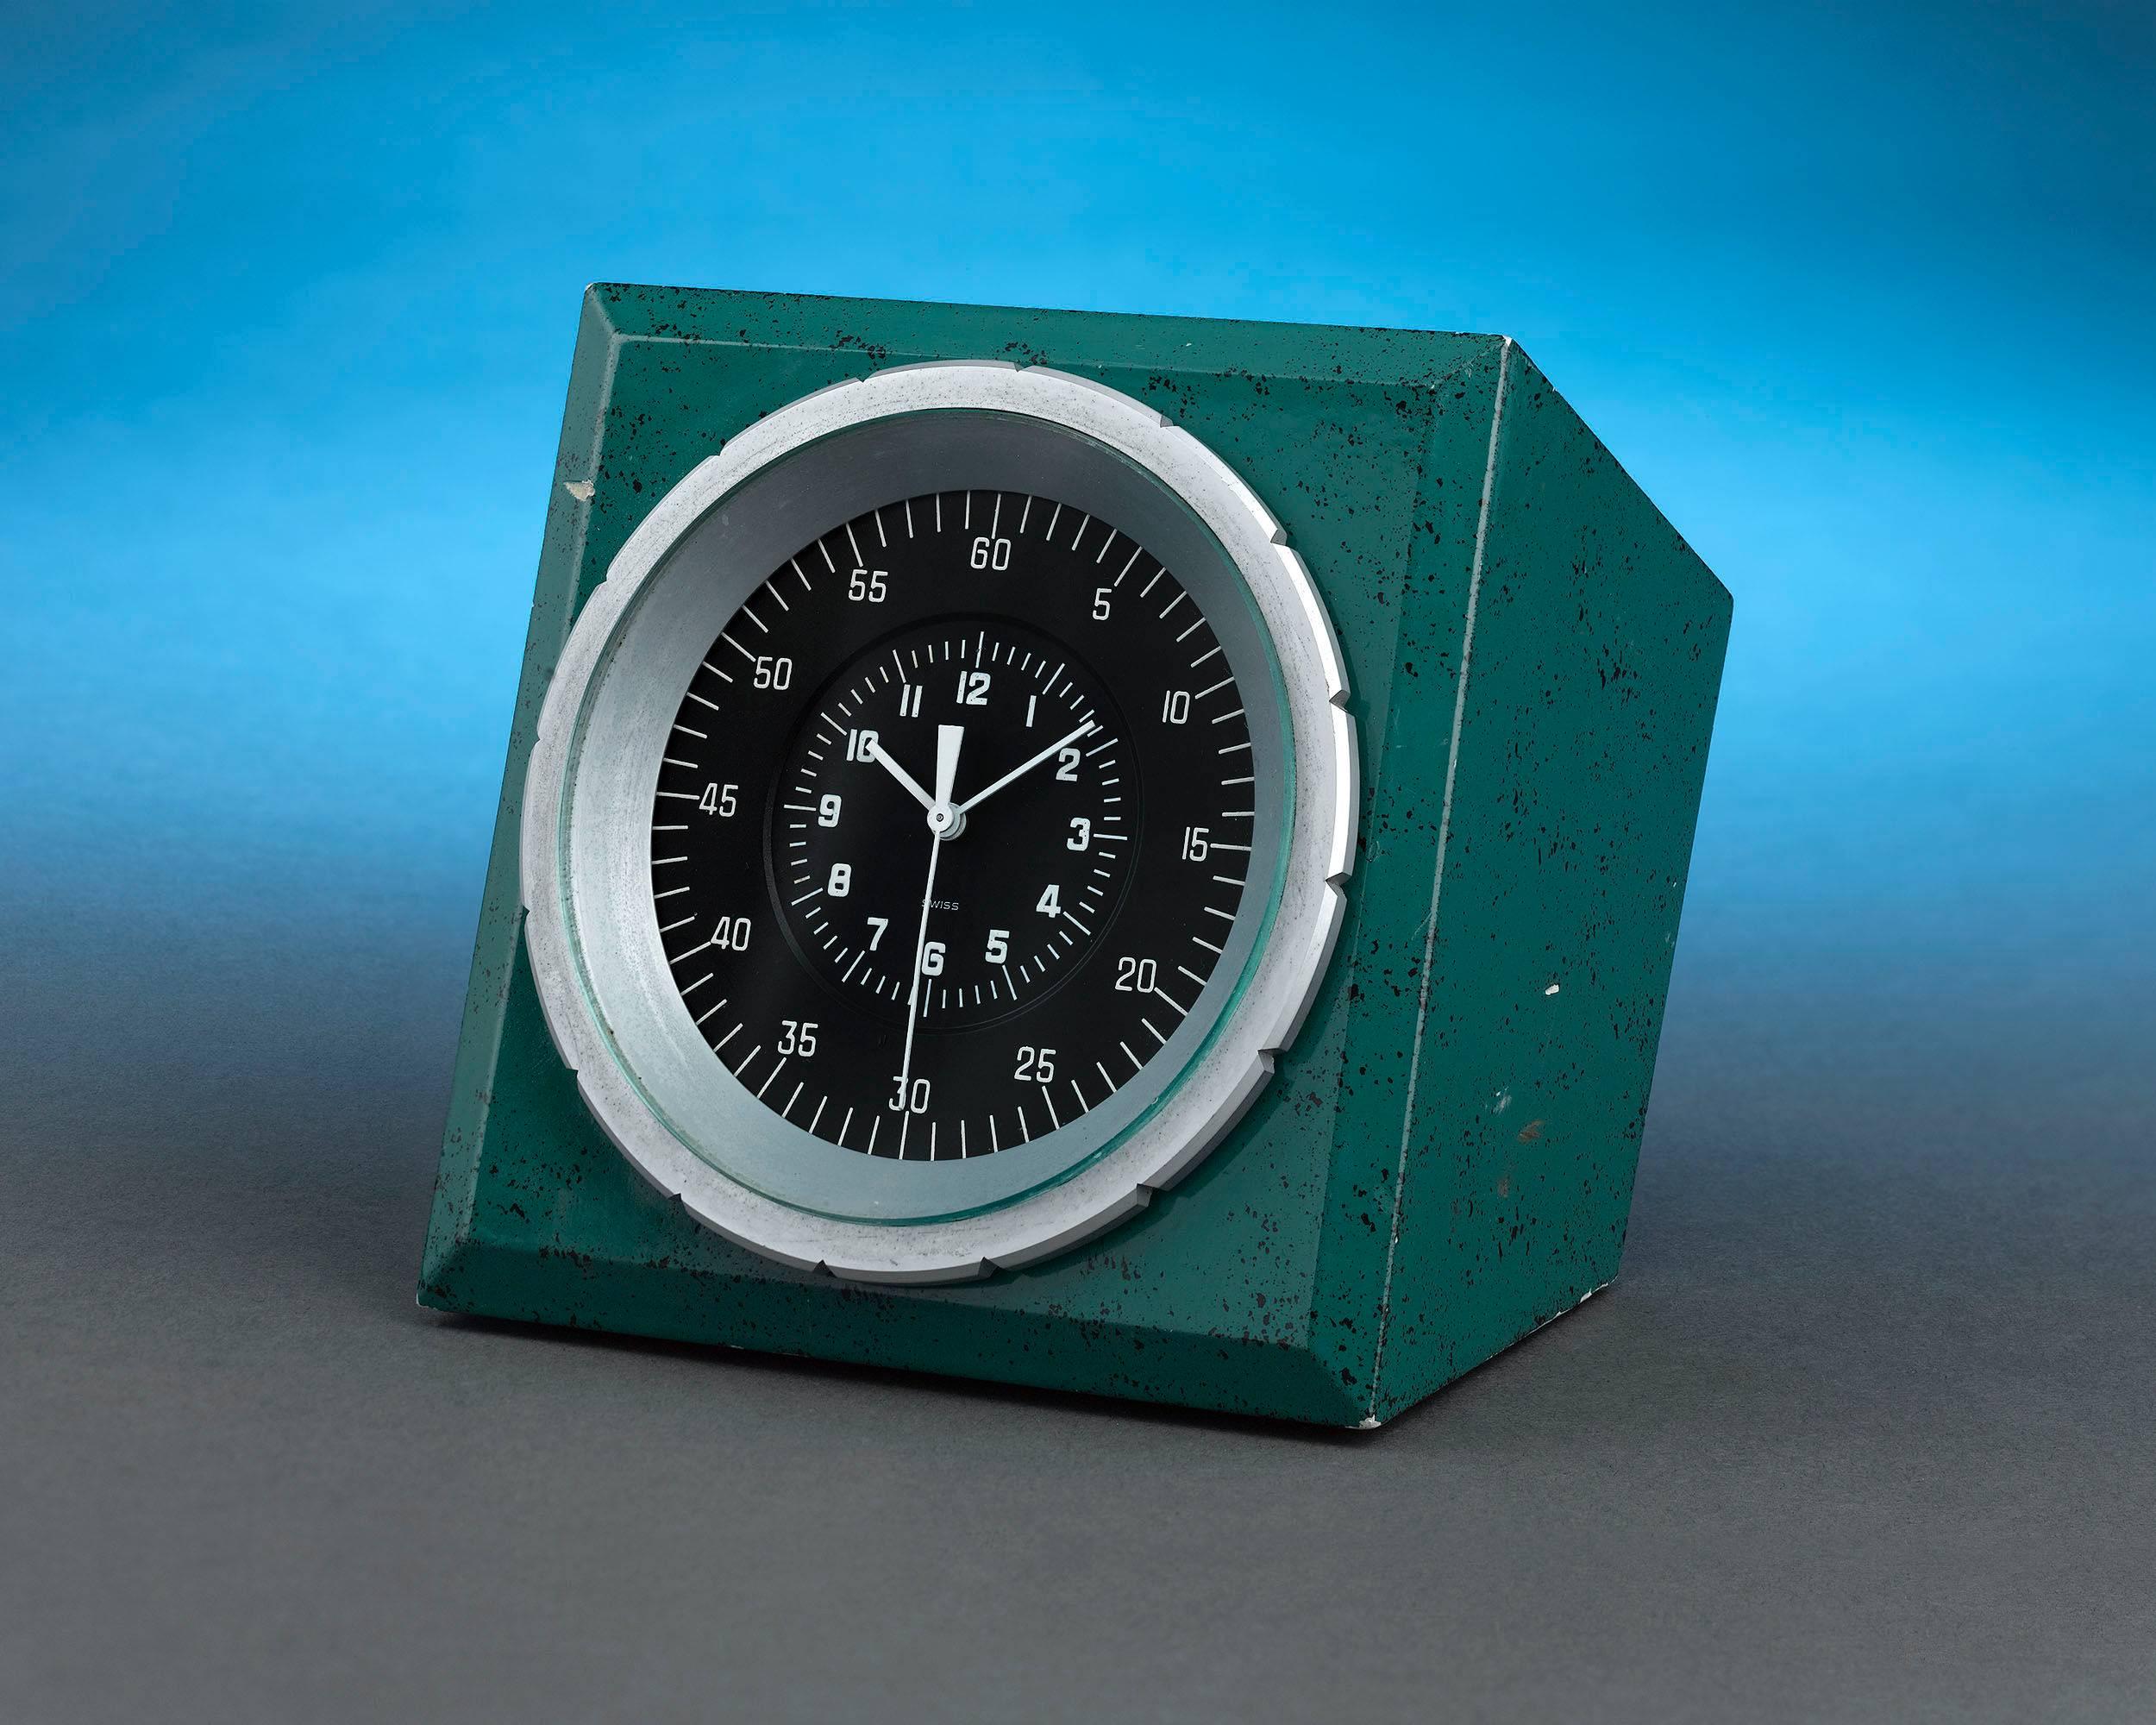 Patek Philippe created this rare Chronoquartz electronic table clock for Rolex. Accentuated in Rolex's iconic green hue, this analog display unit would have been connected to a master clock system to provide its owner with the most accurate time